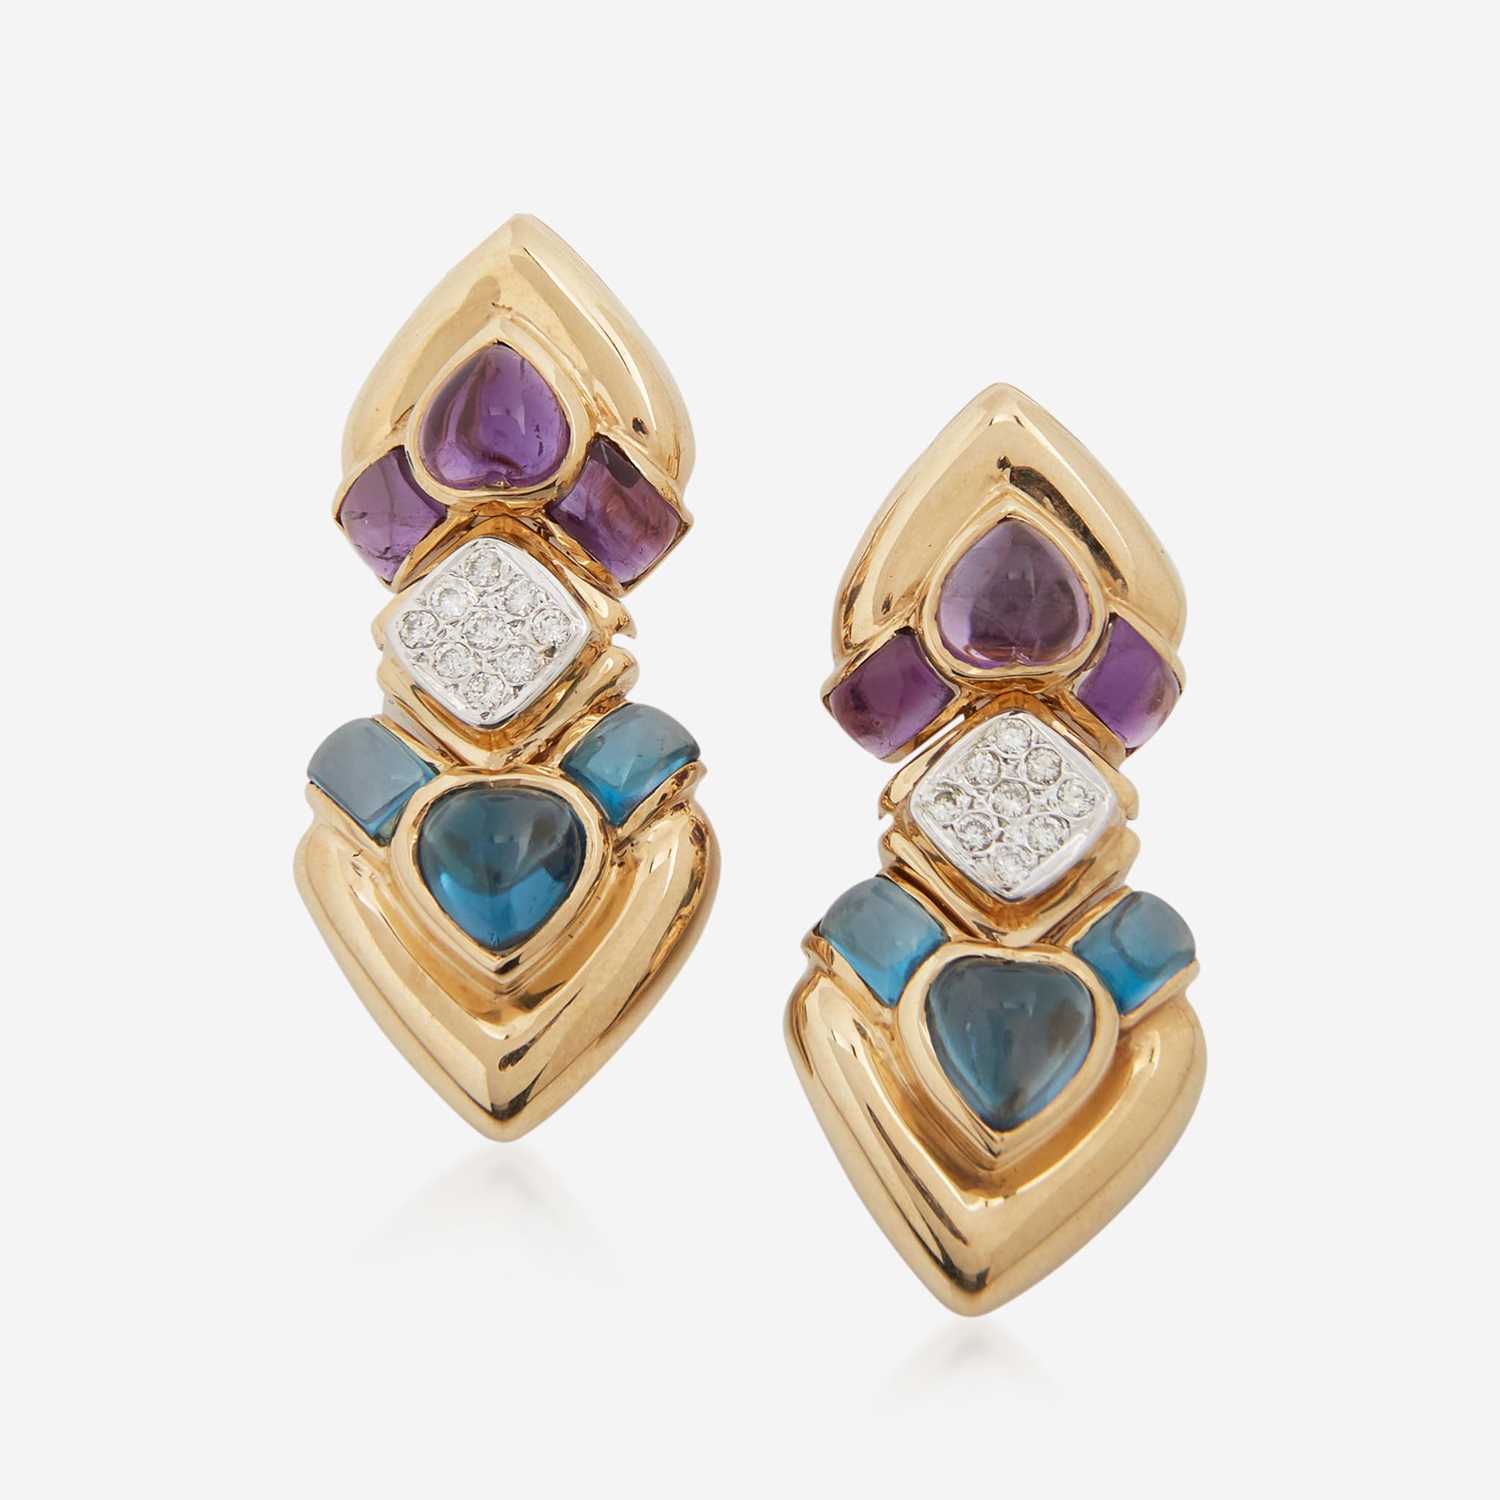 Lot 34 - A Pair of 14K Yellow Gold and Gemstone Earrings